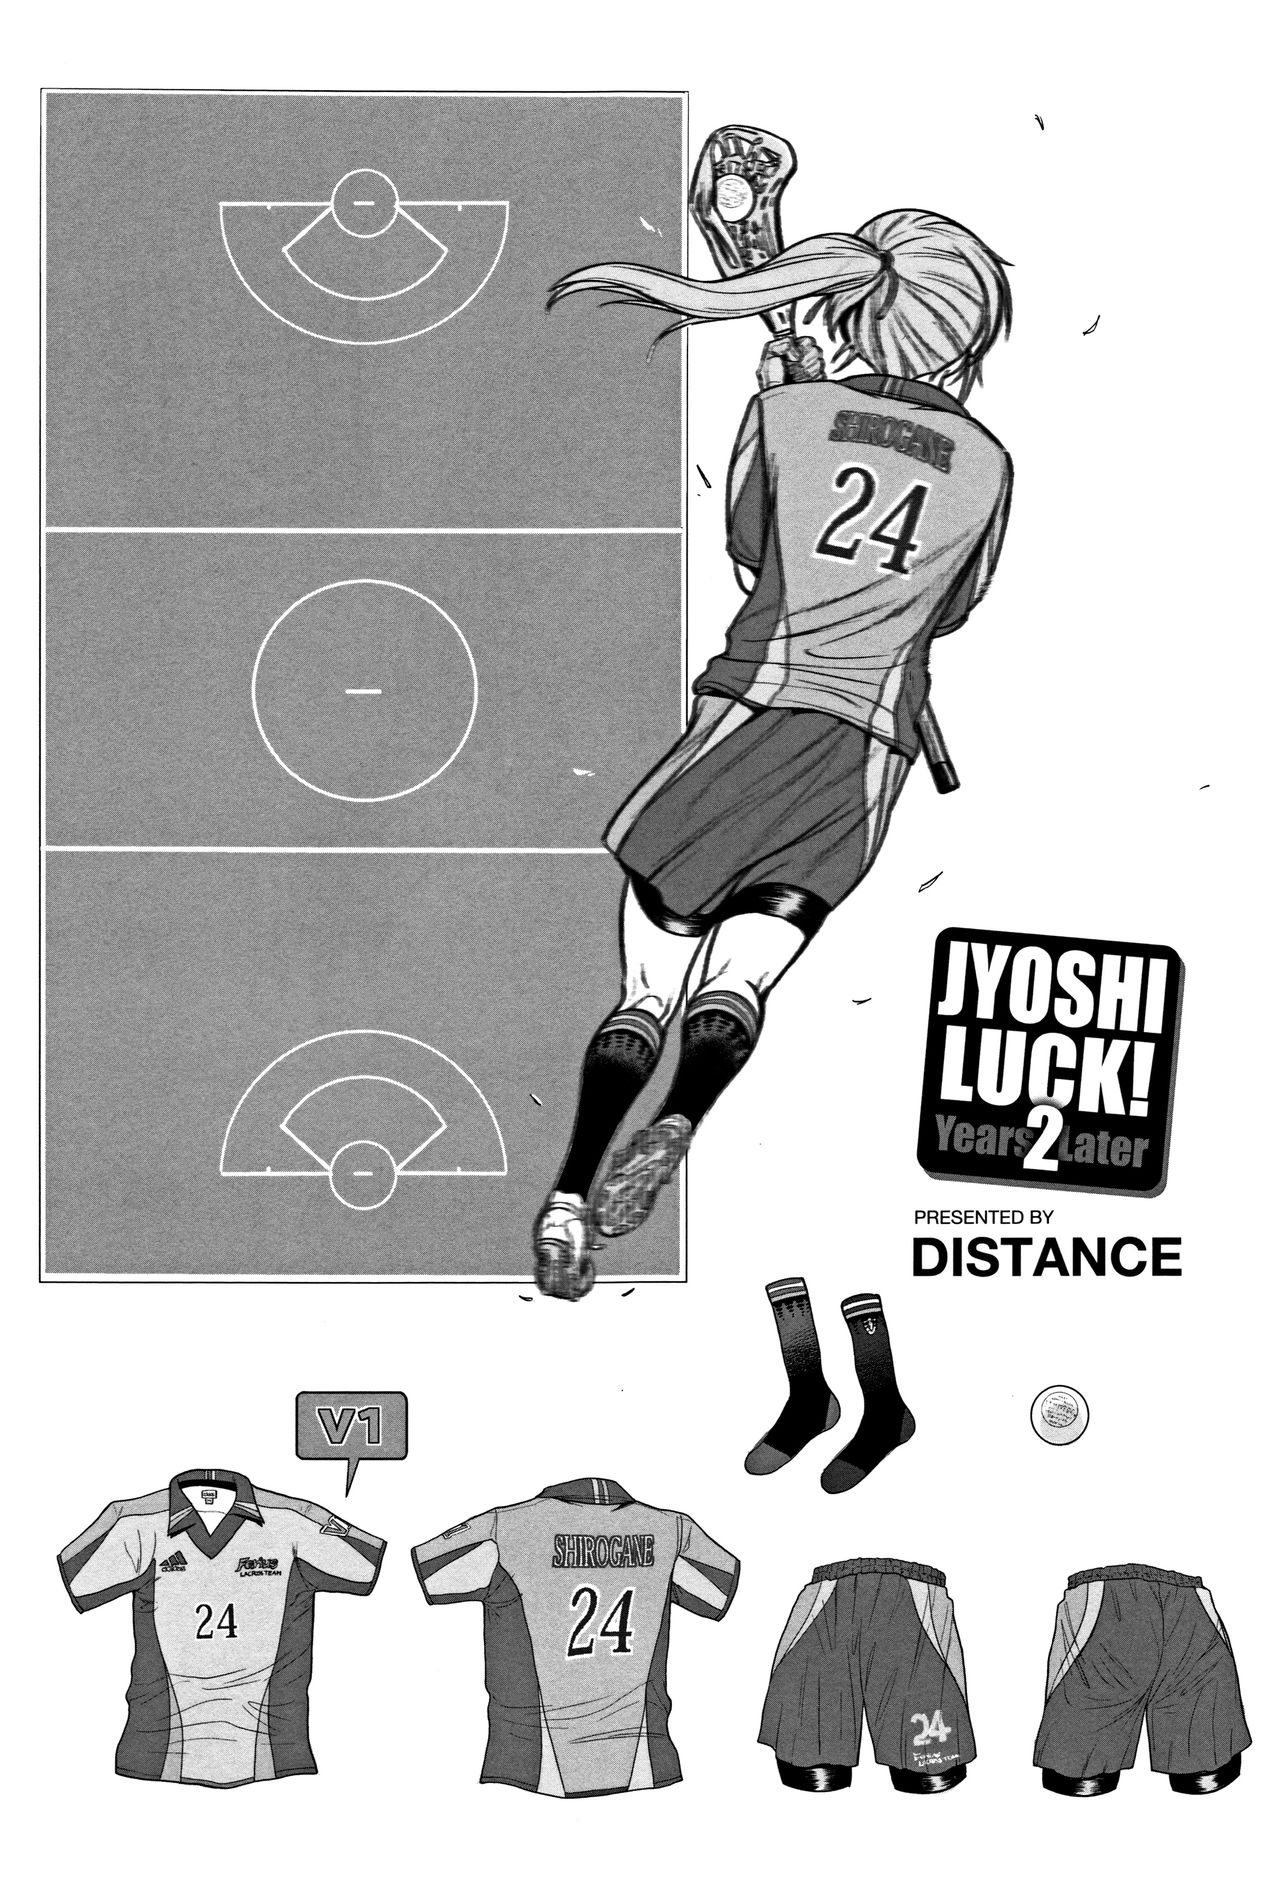 [DISTANCE] Joshi Lacu! - Girls Lacrosse Club ~2 Years Later~ [English] =The Lost Light= [DISTANCE] じょしラク！～2 Years Later～ [英訳]